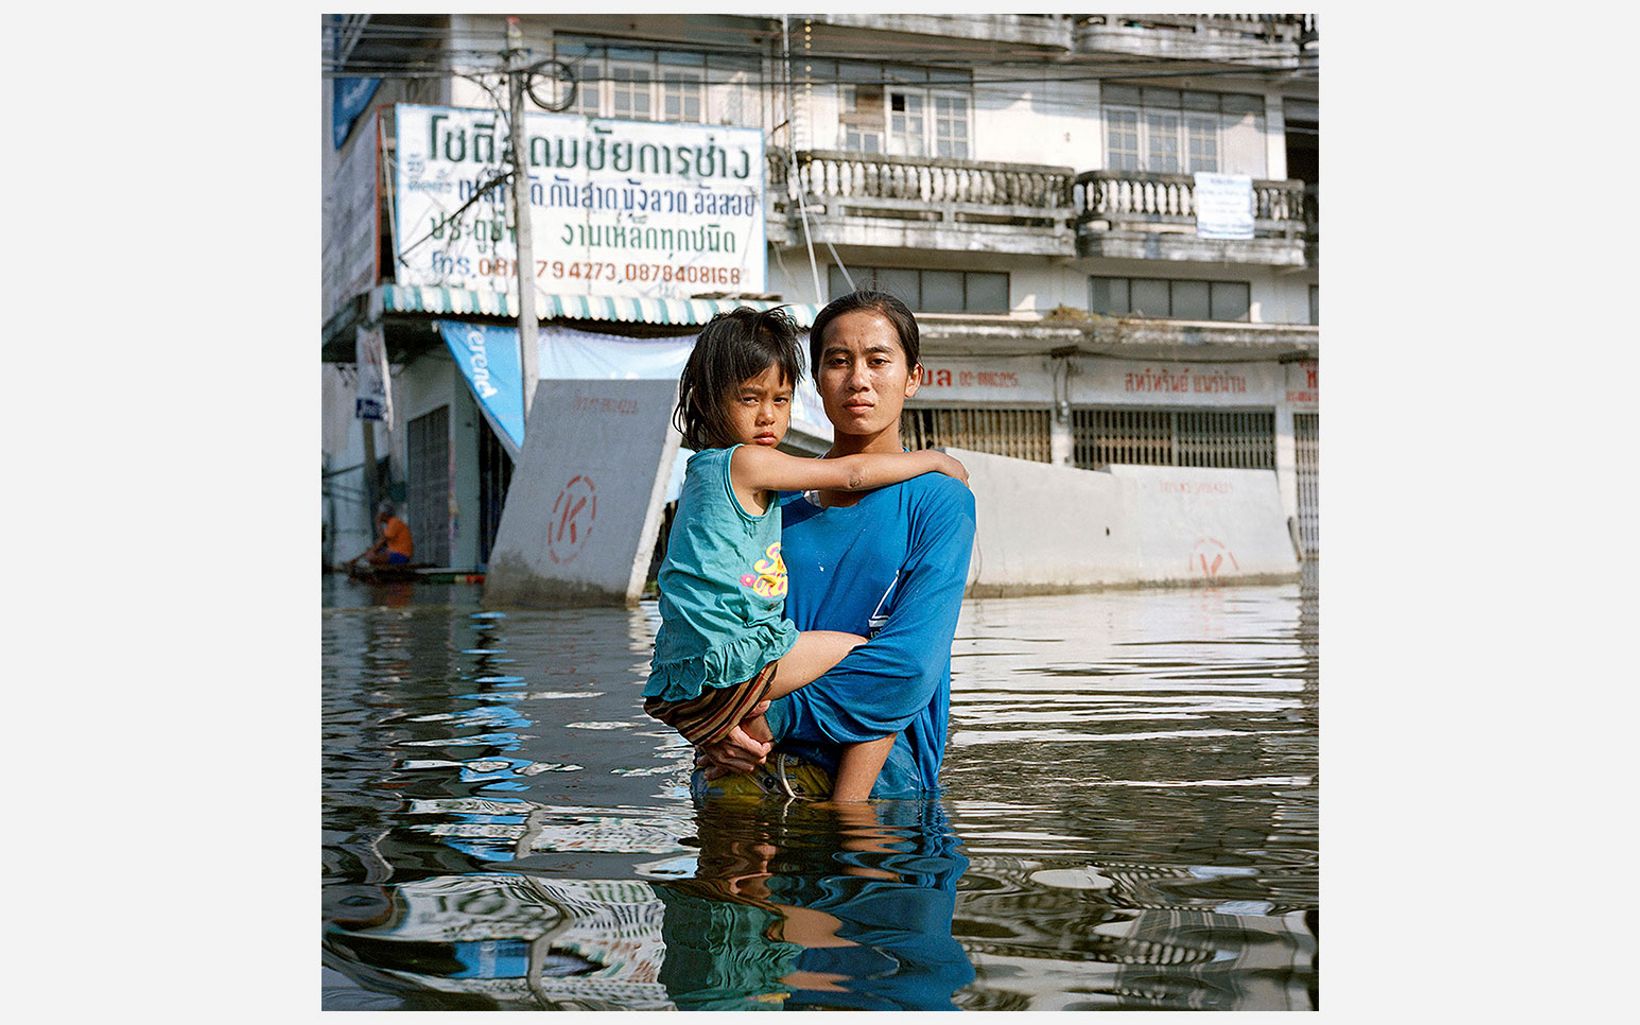 Anchalee Koyama holds her daughter over deep floodwater in the Taweewattana district of Bangkok, Thailand